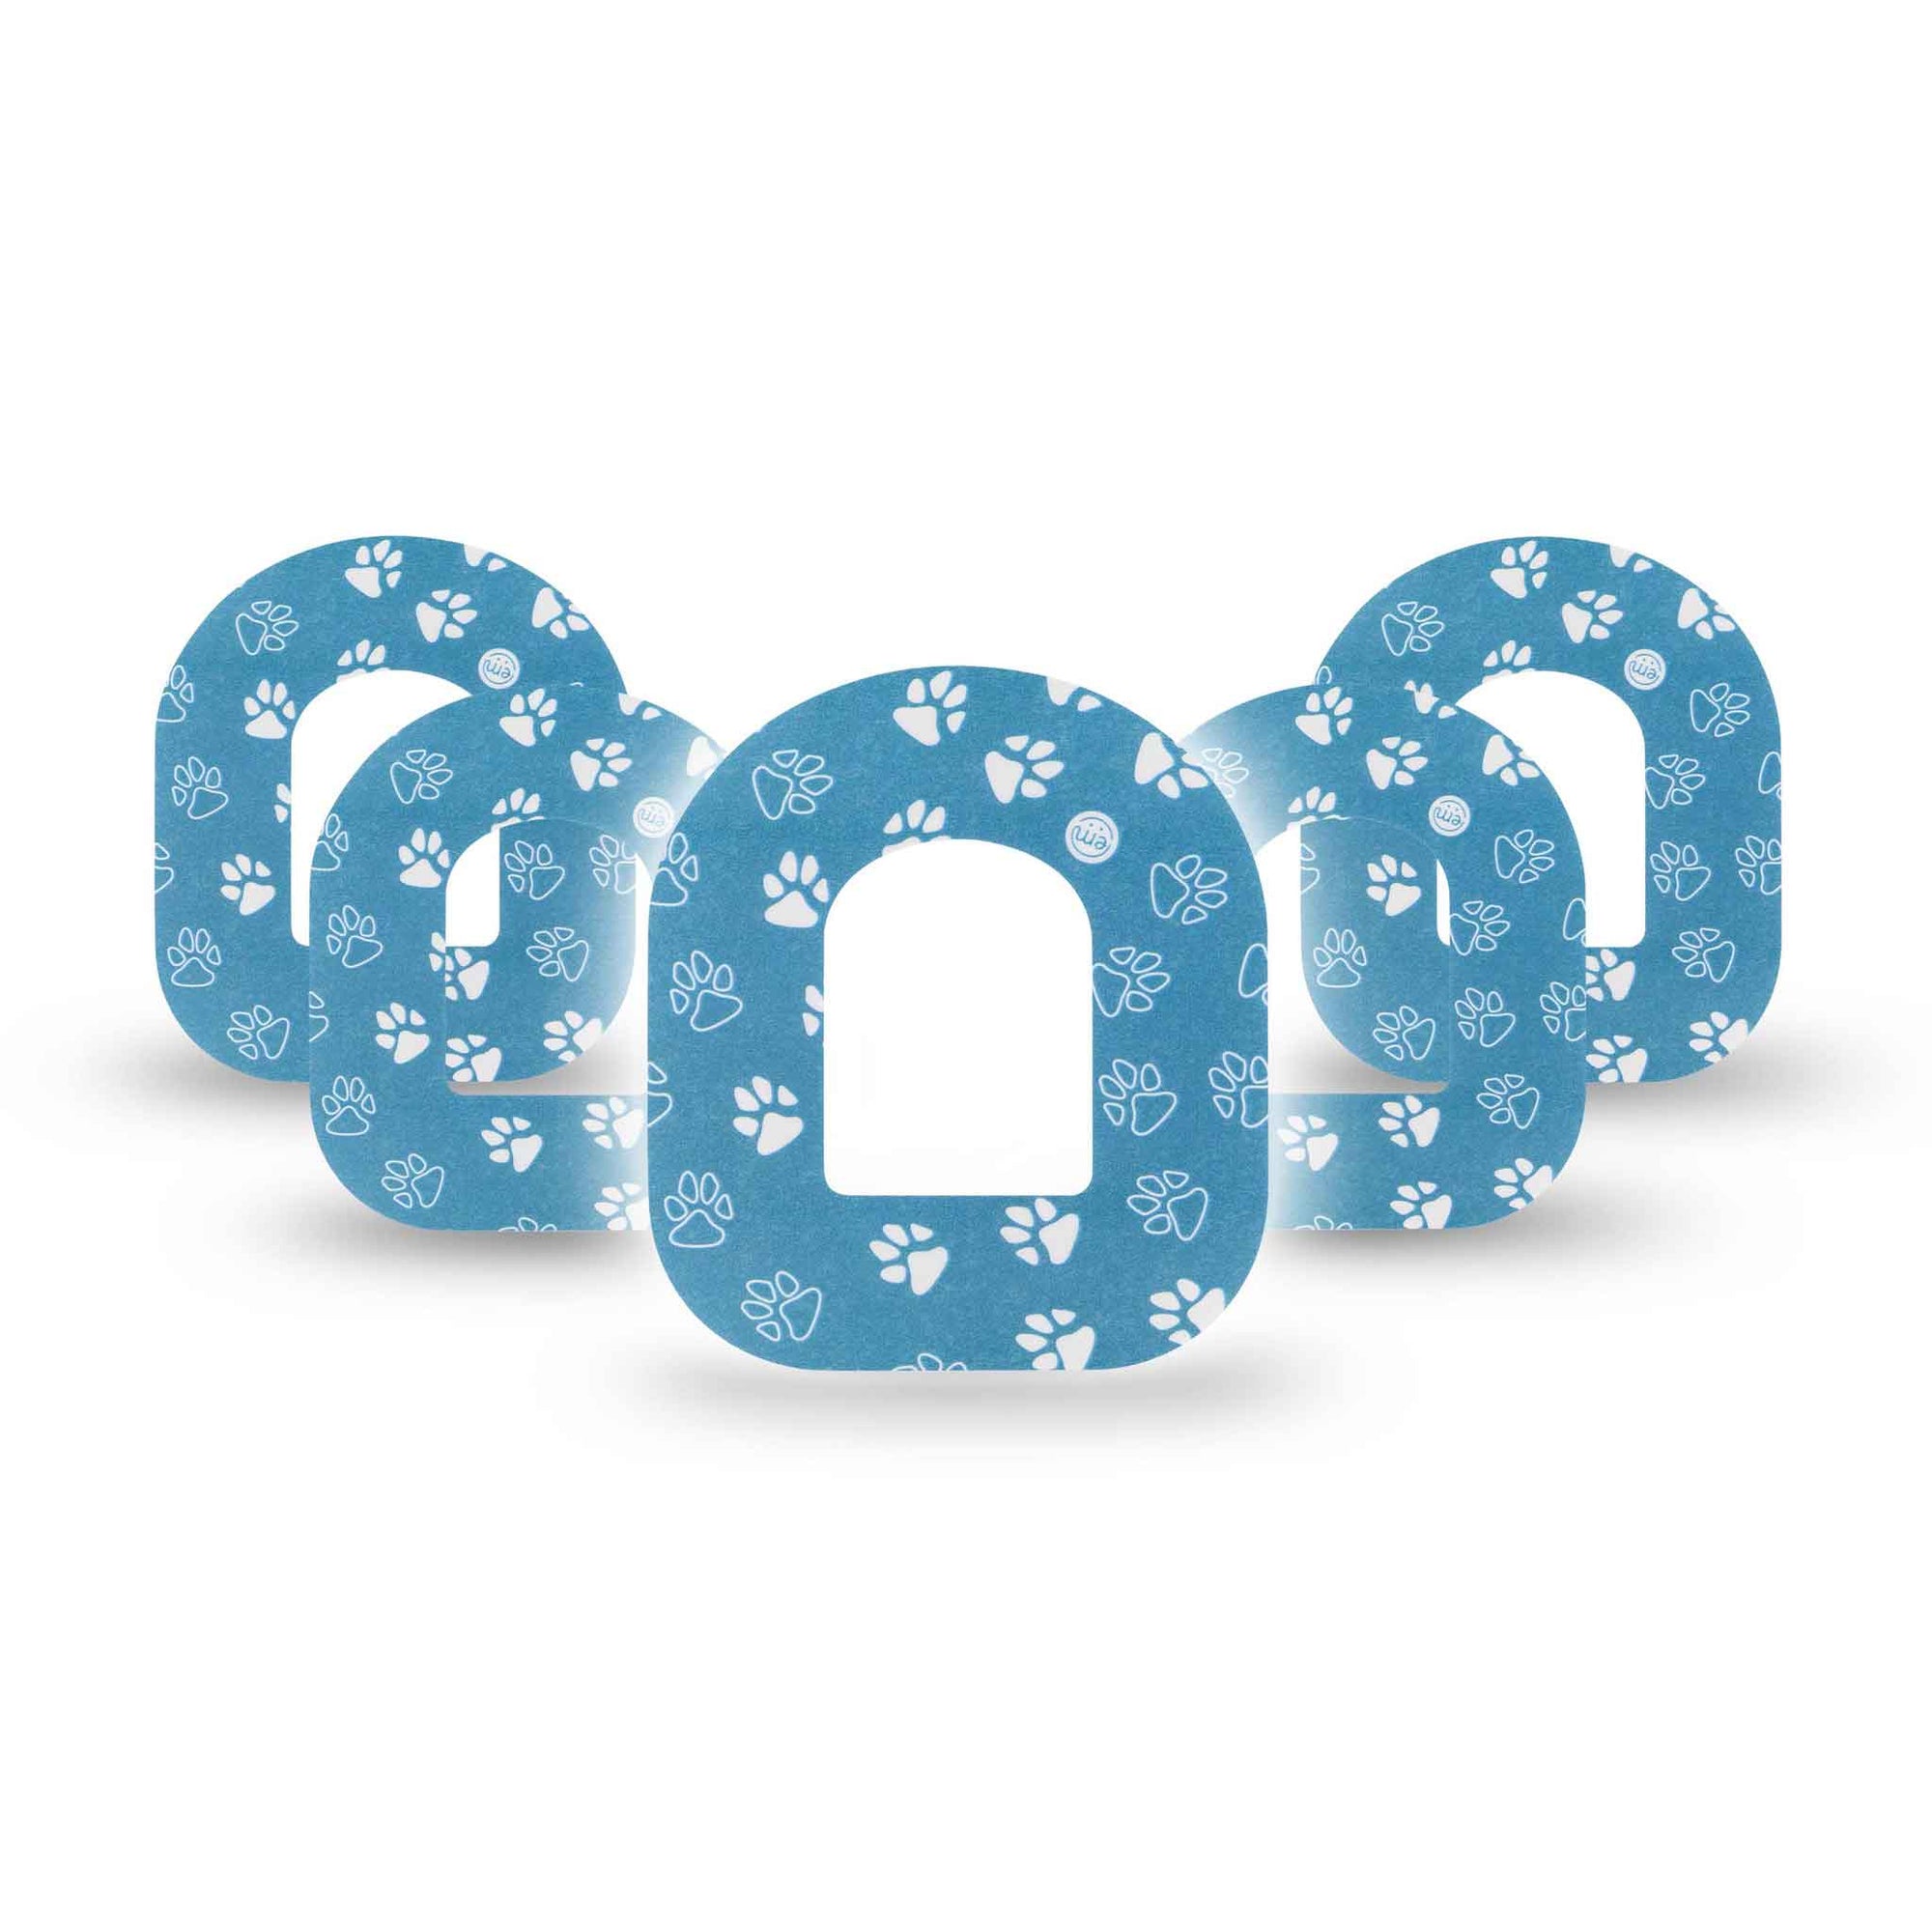 ExpressionMed Blue and White Pawprints Omnipod Tape 5-Pack